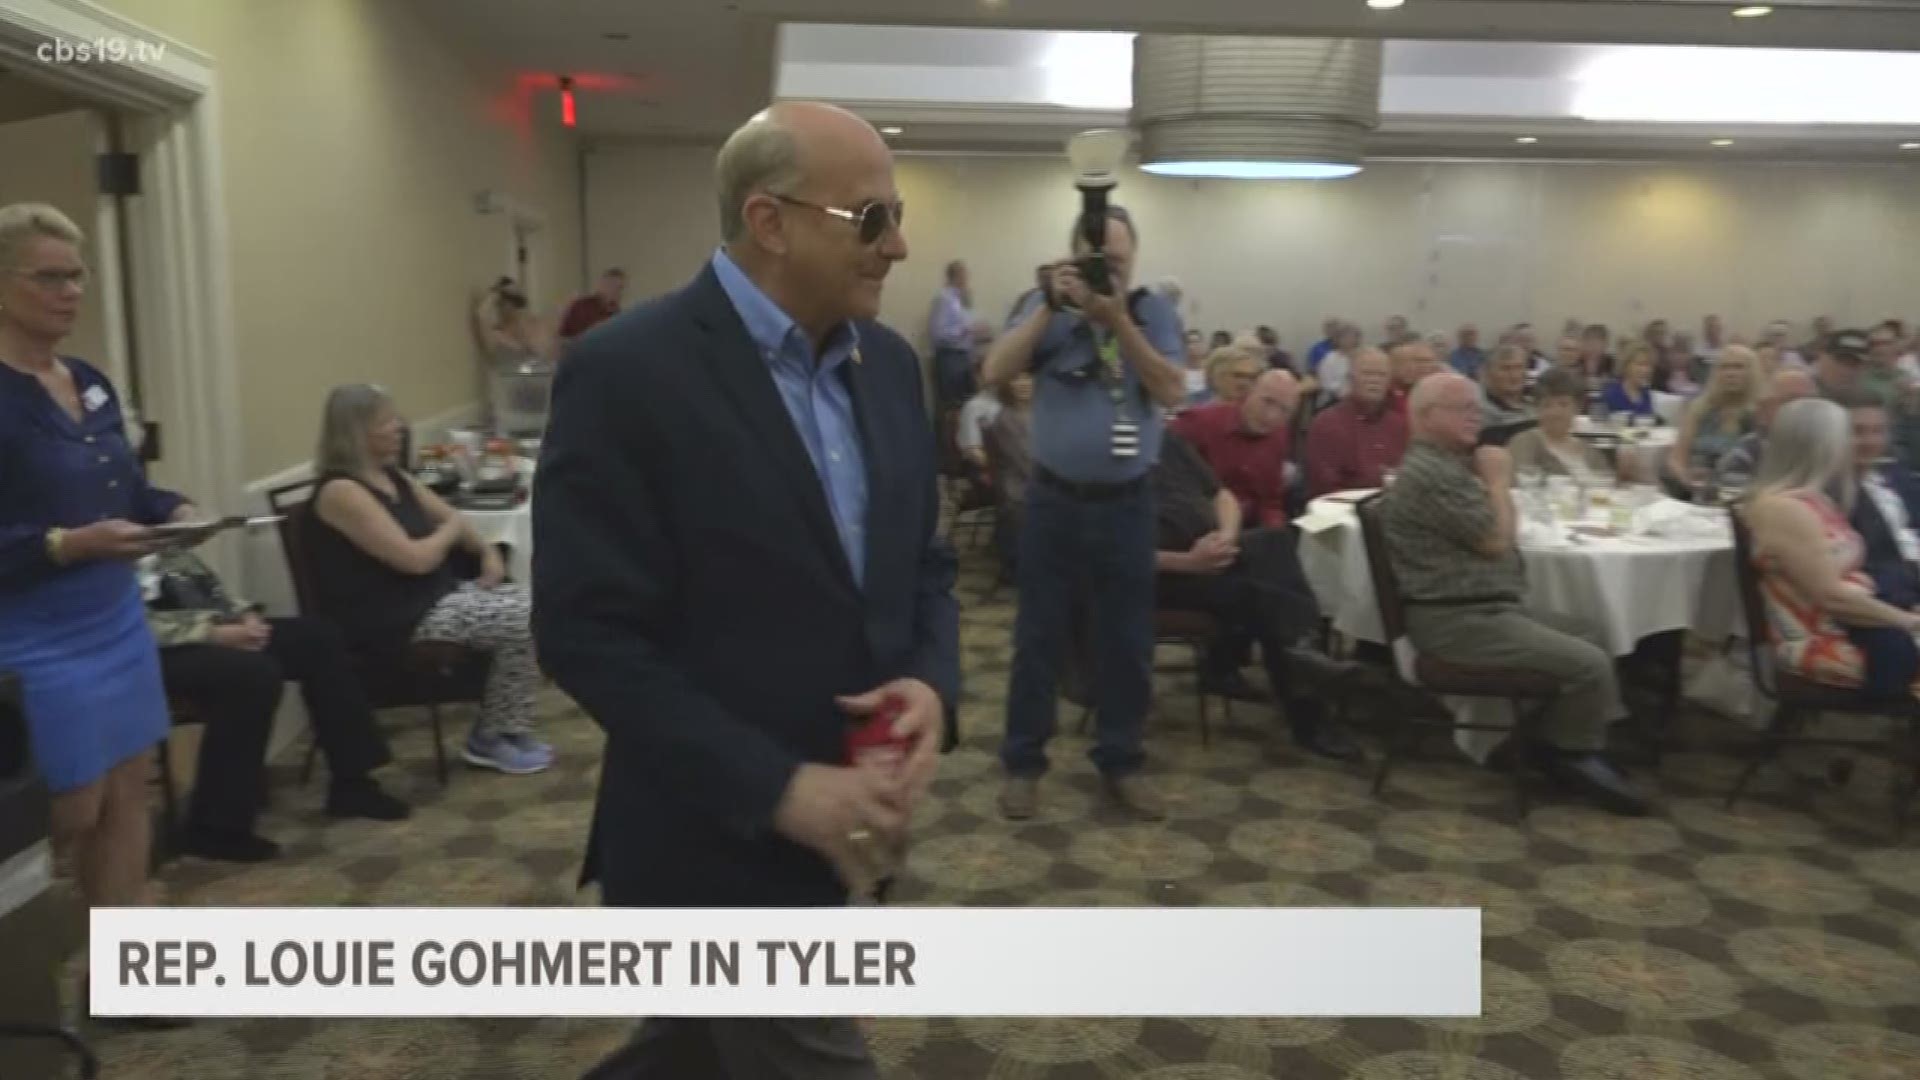 Due to the Easter break at the capital, Congressman Louie Gohmert came back to East Texas. Tuesday night he addressed constituents about what is happening in Washington D.C.